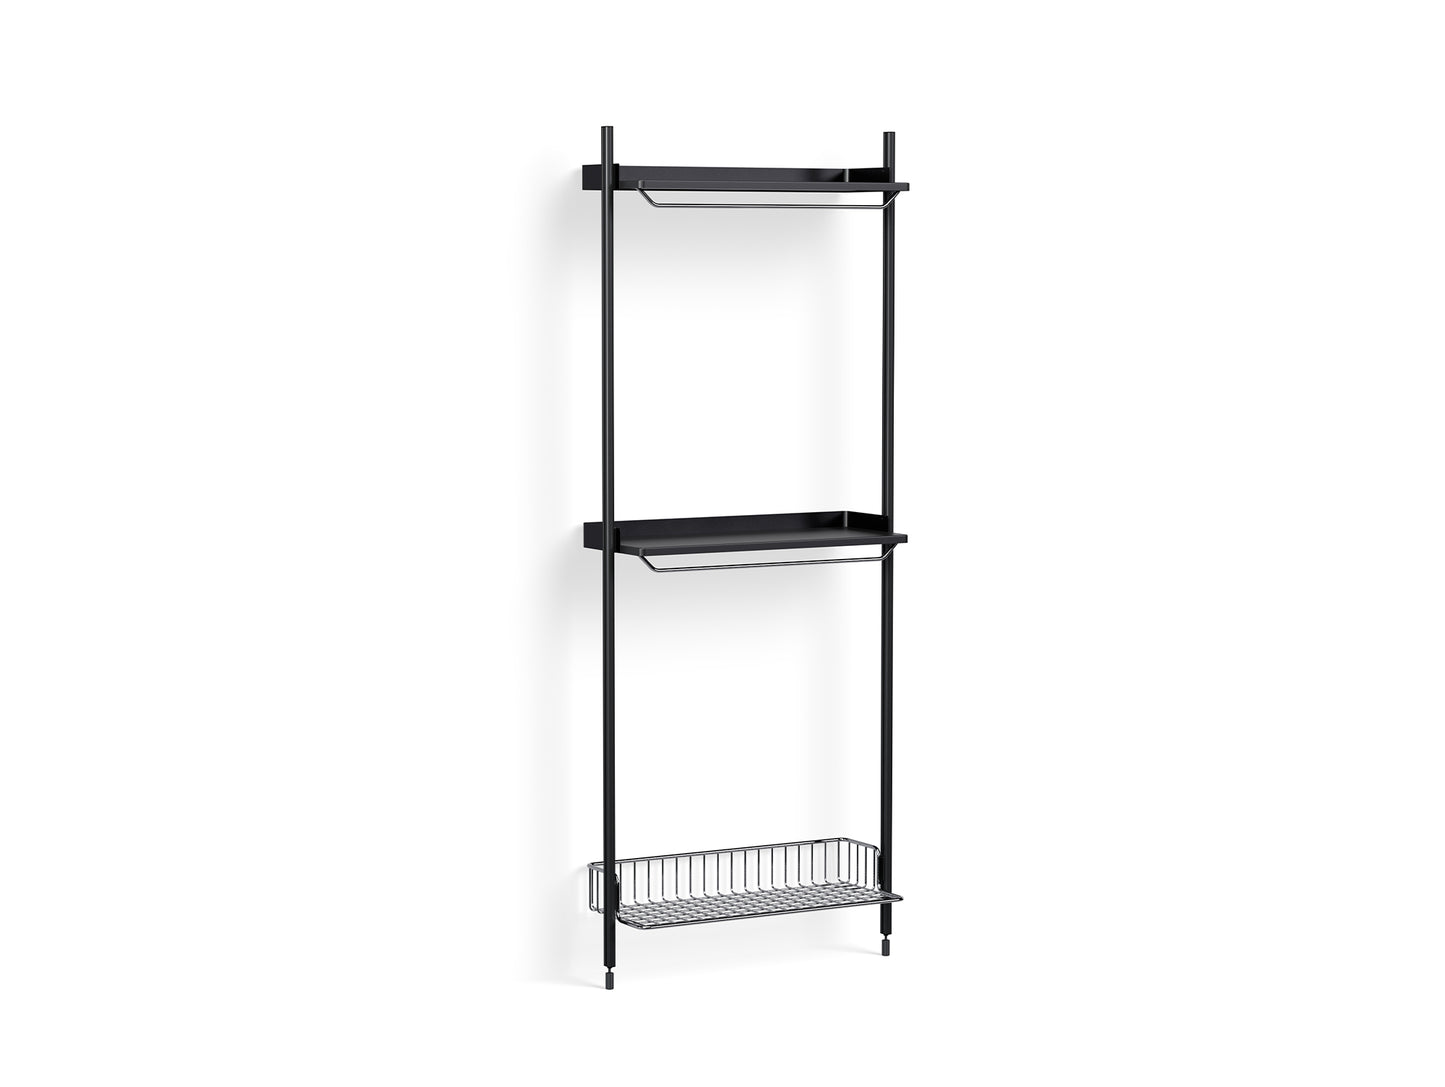 Pier System 1031 by HAY - Black Anodised Aluminium Uprights / PS Black with Chromed Wire Shelf